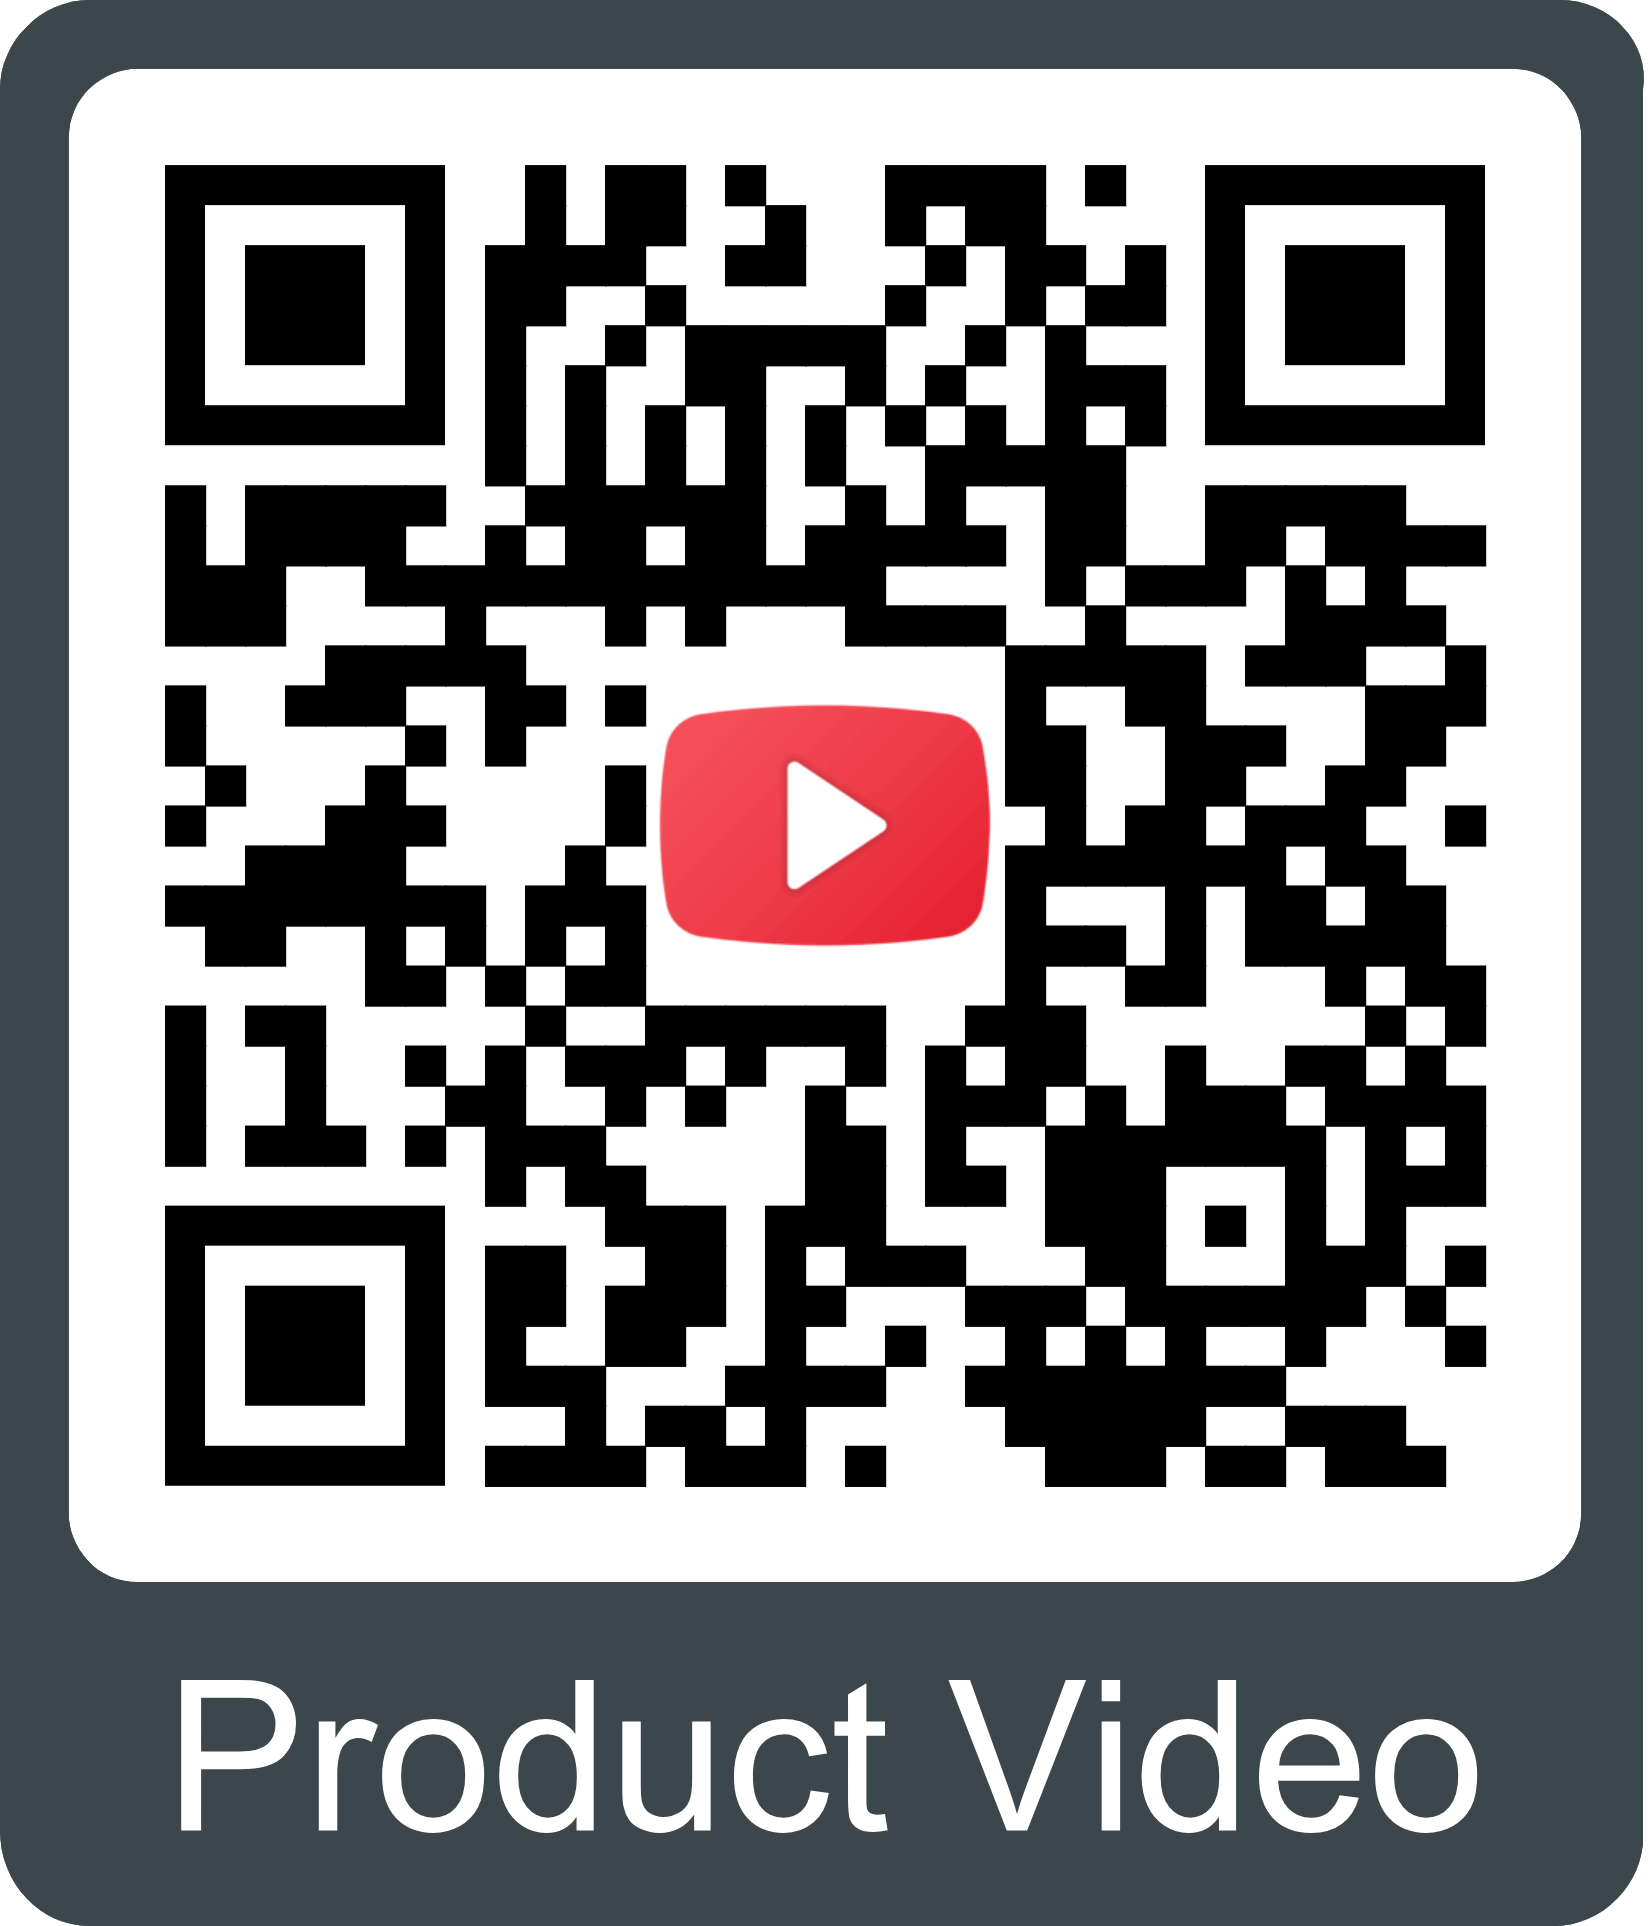 QR code to play video